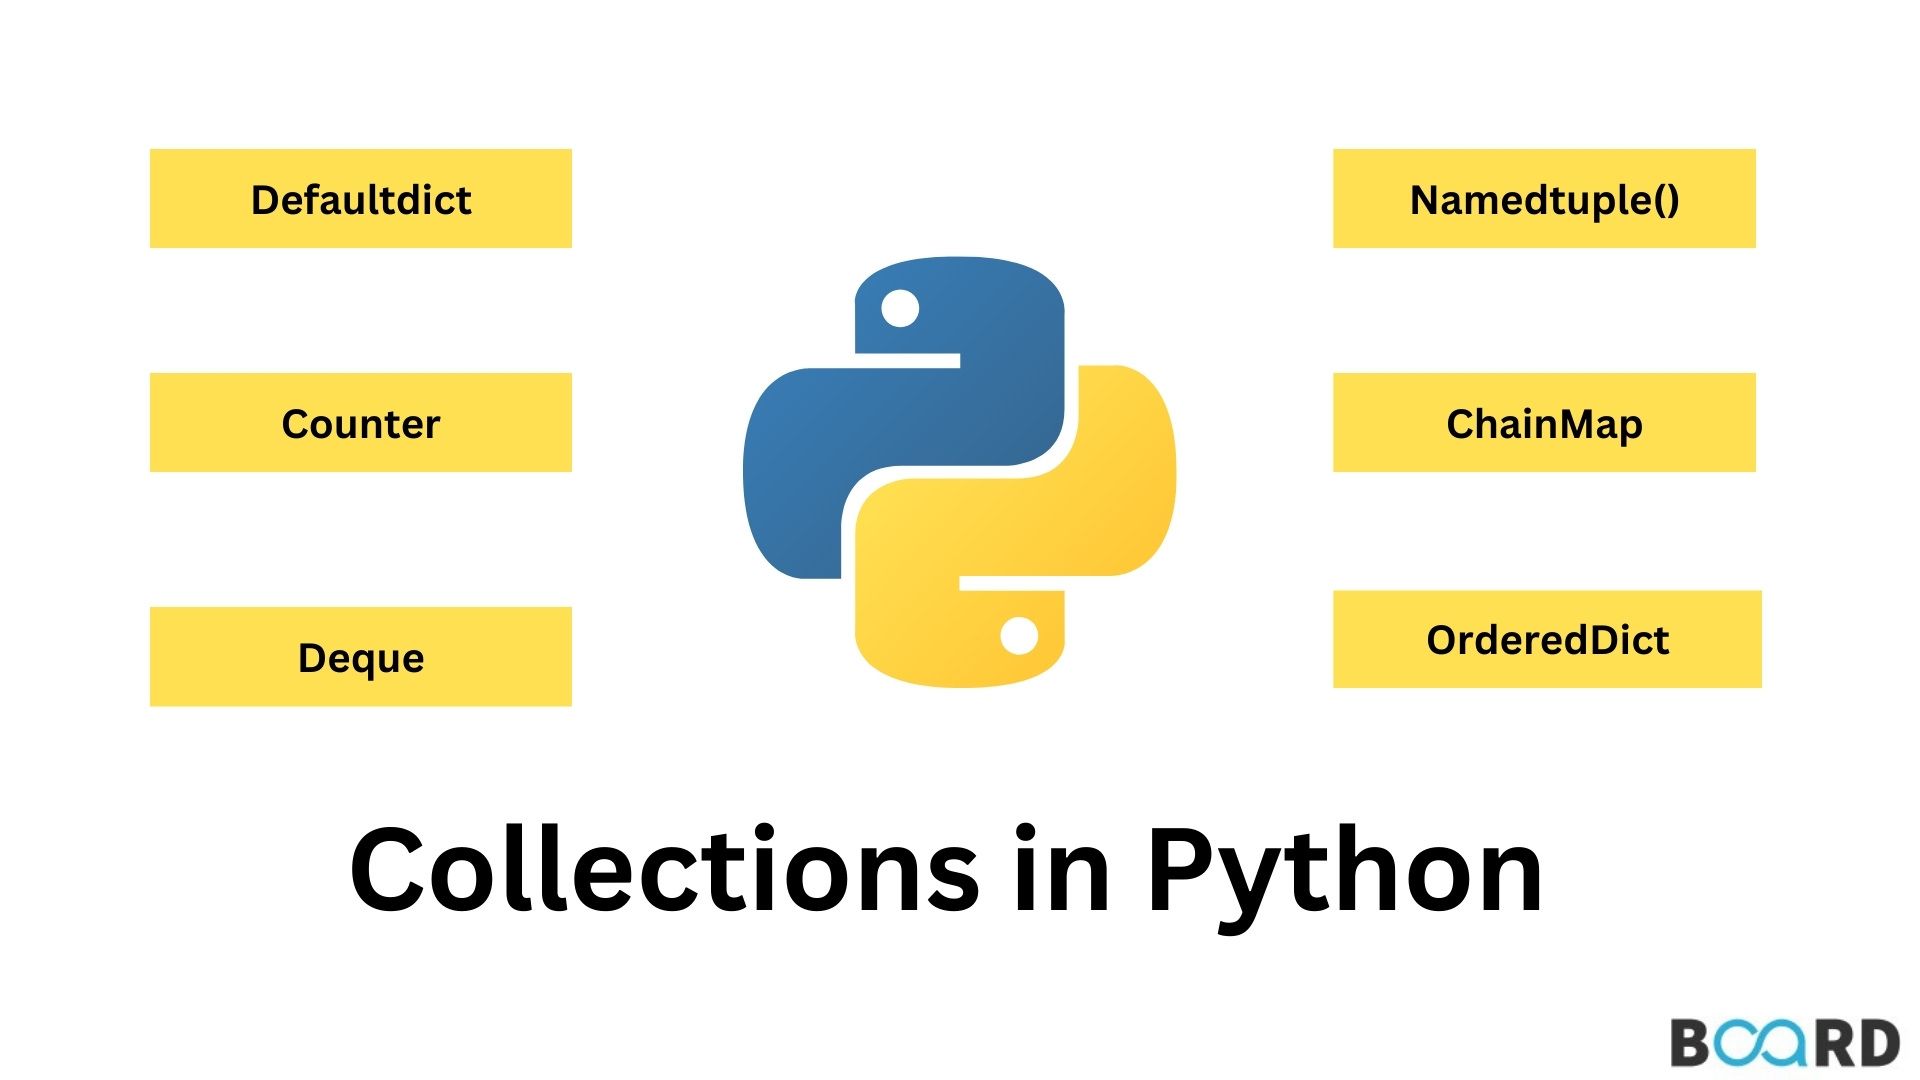 What are Collections in Python